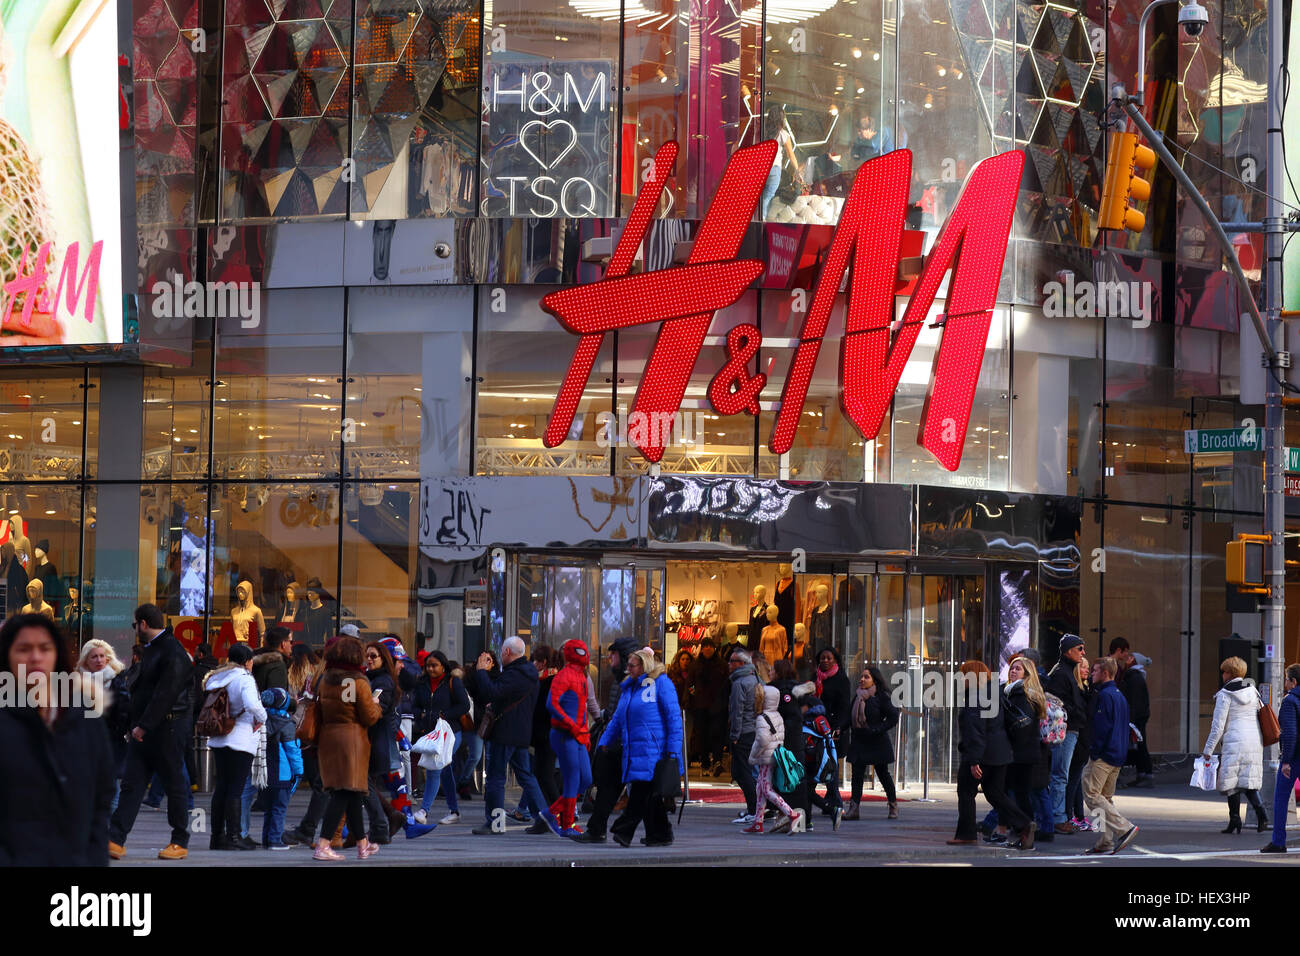 H&M Times Square, New York, NY Stock Photo - Alamy